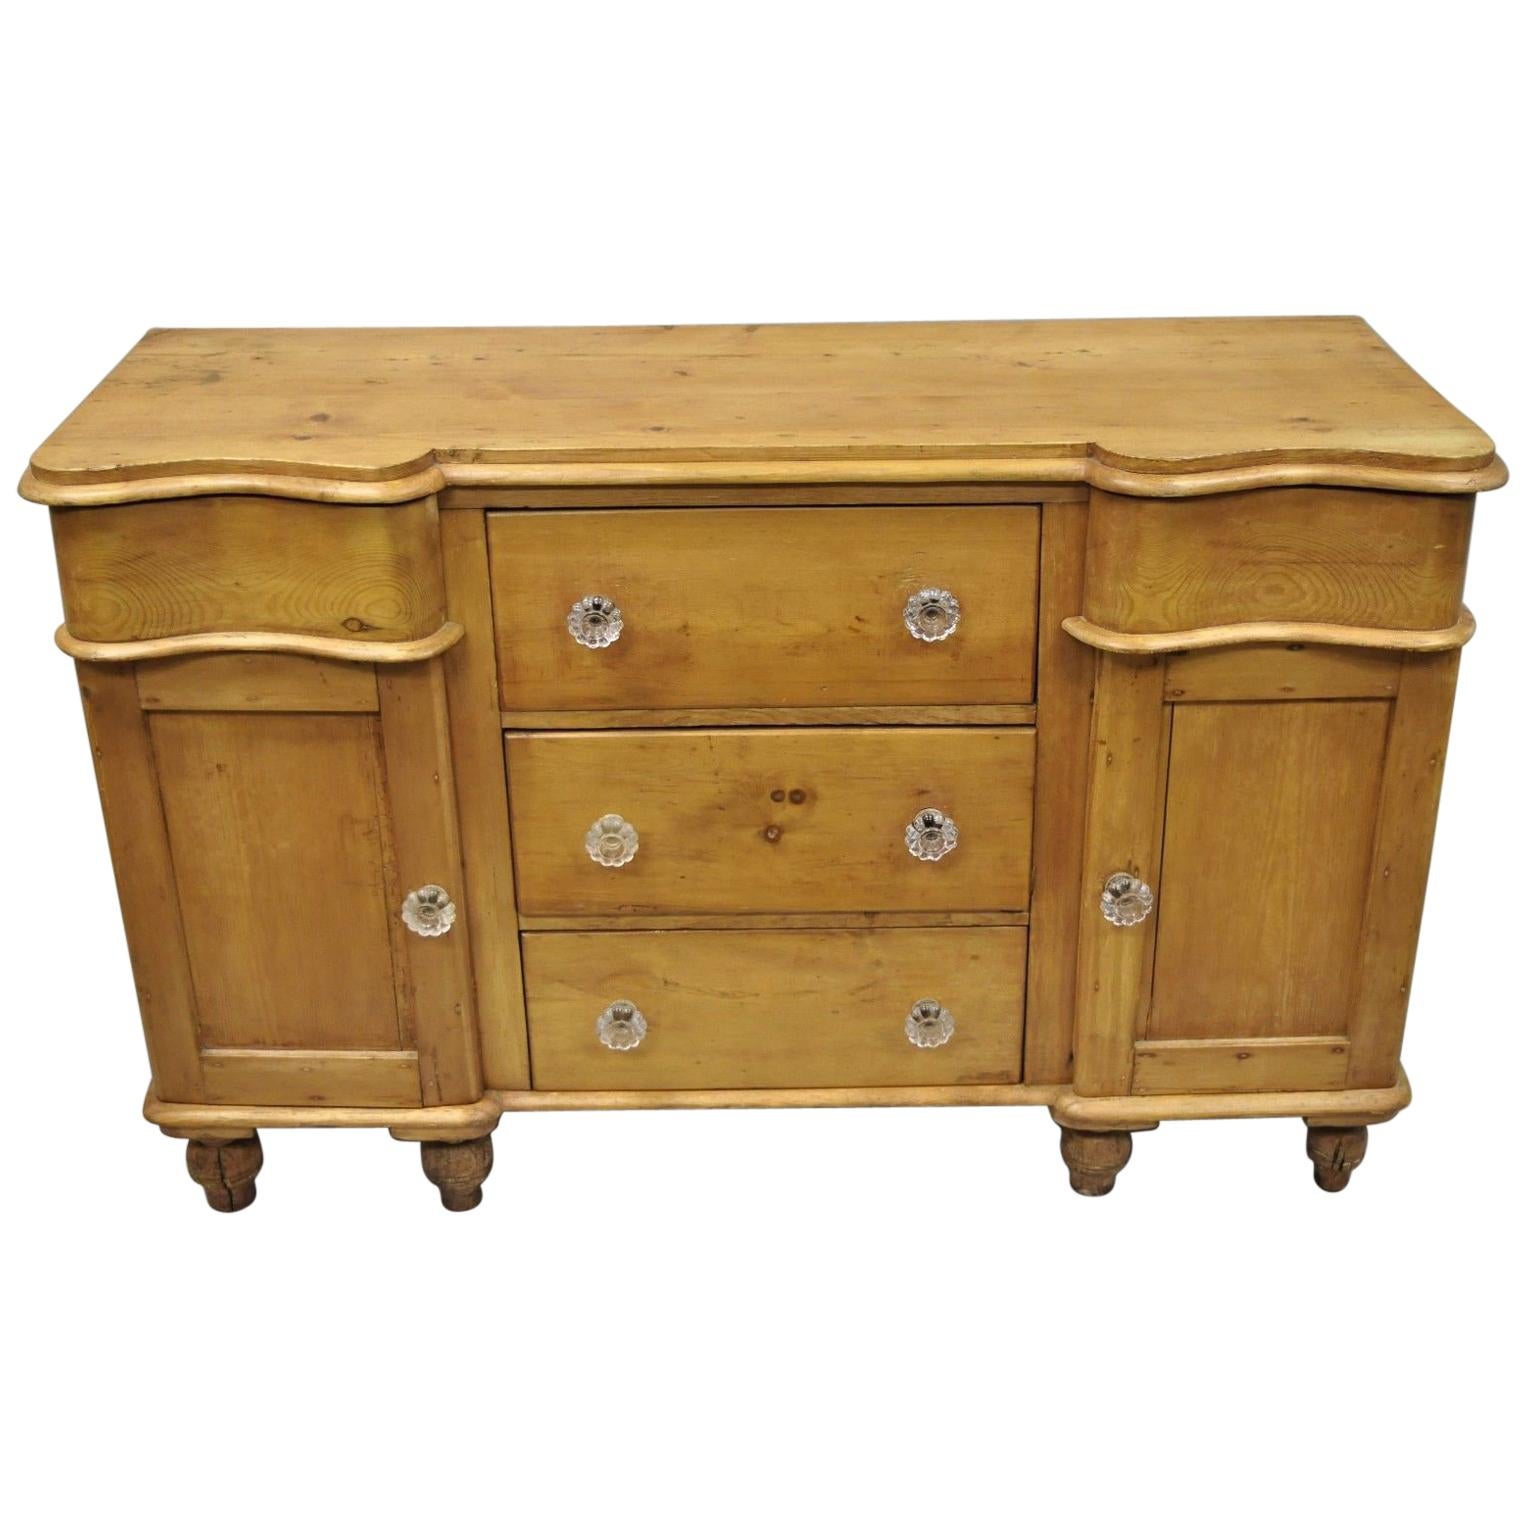 Knotty Pine French Country Primitive Sideboard Server Buffet Cabinet Glass Knobs